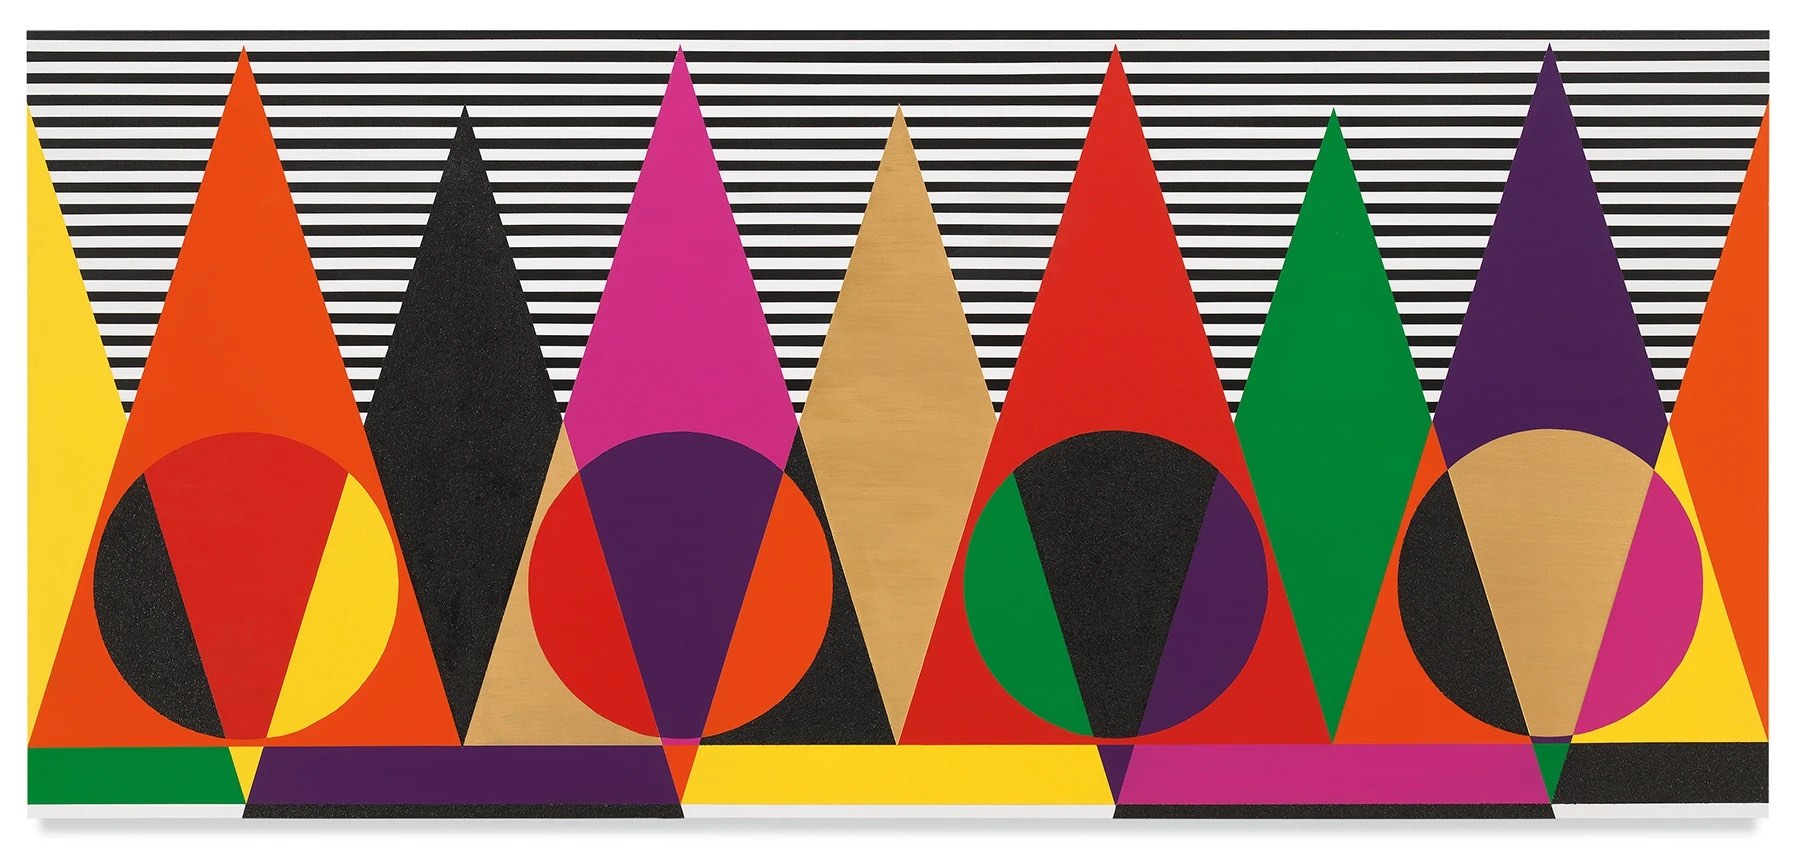 36 × 80 × 1 1/4 in. abstract painting dominated by triangles, circles, and rectangular shapes. The "background" of the composition is a black and white striped plane while the foreground features imposing triangular figures with circular "bellies". The composition makes prolific use of simultaneous contrast by employing highly saturated red, yellow, orange, green, and magenta colors next to each other.  